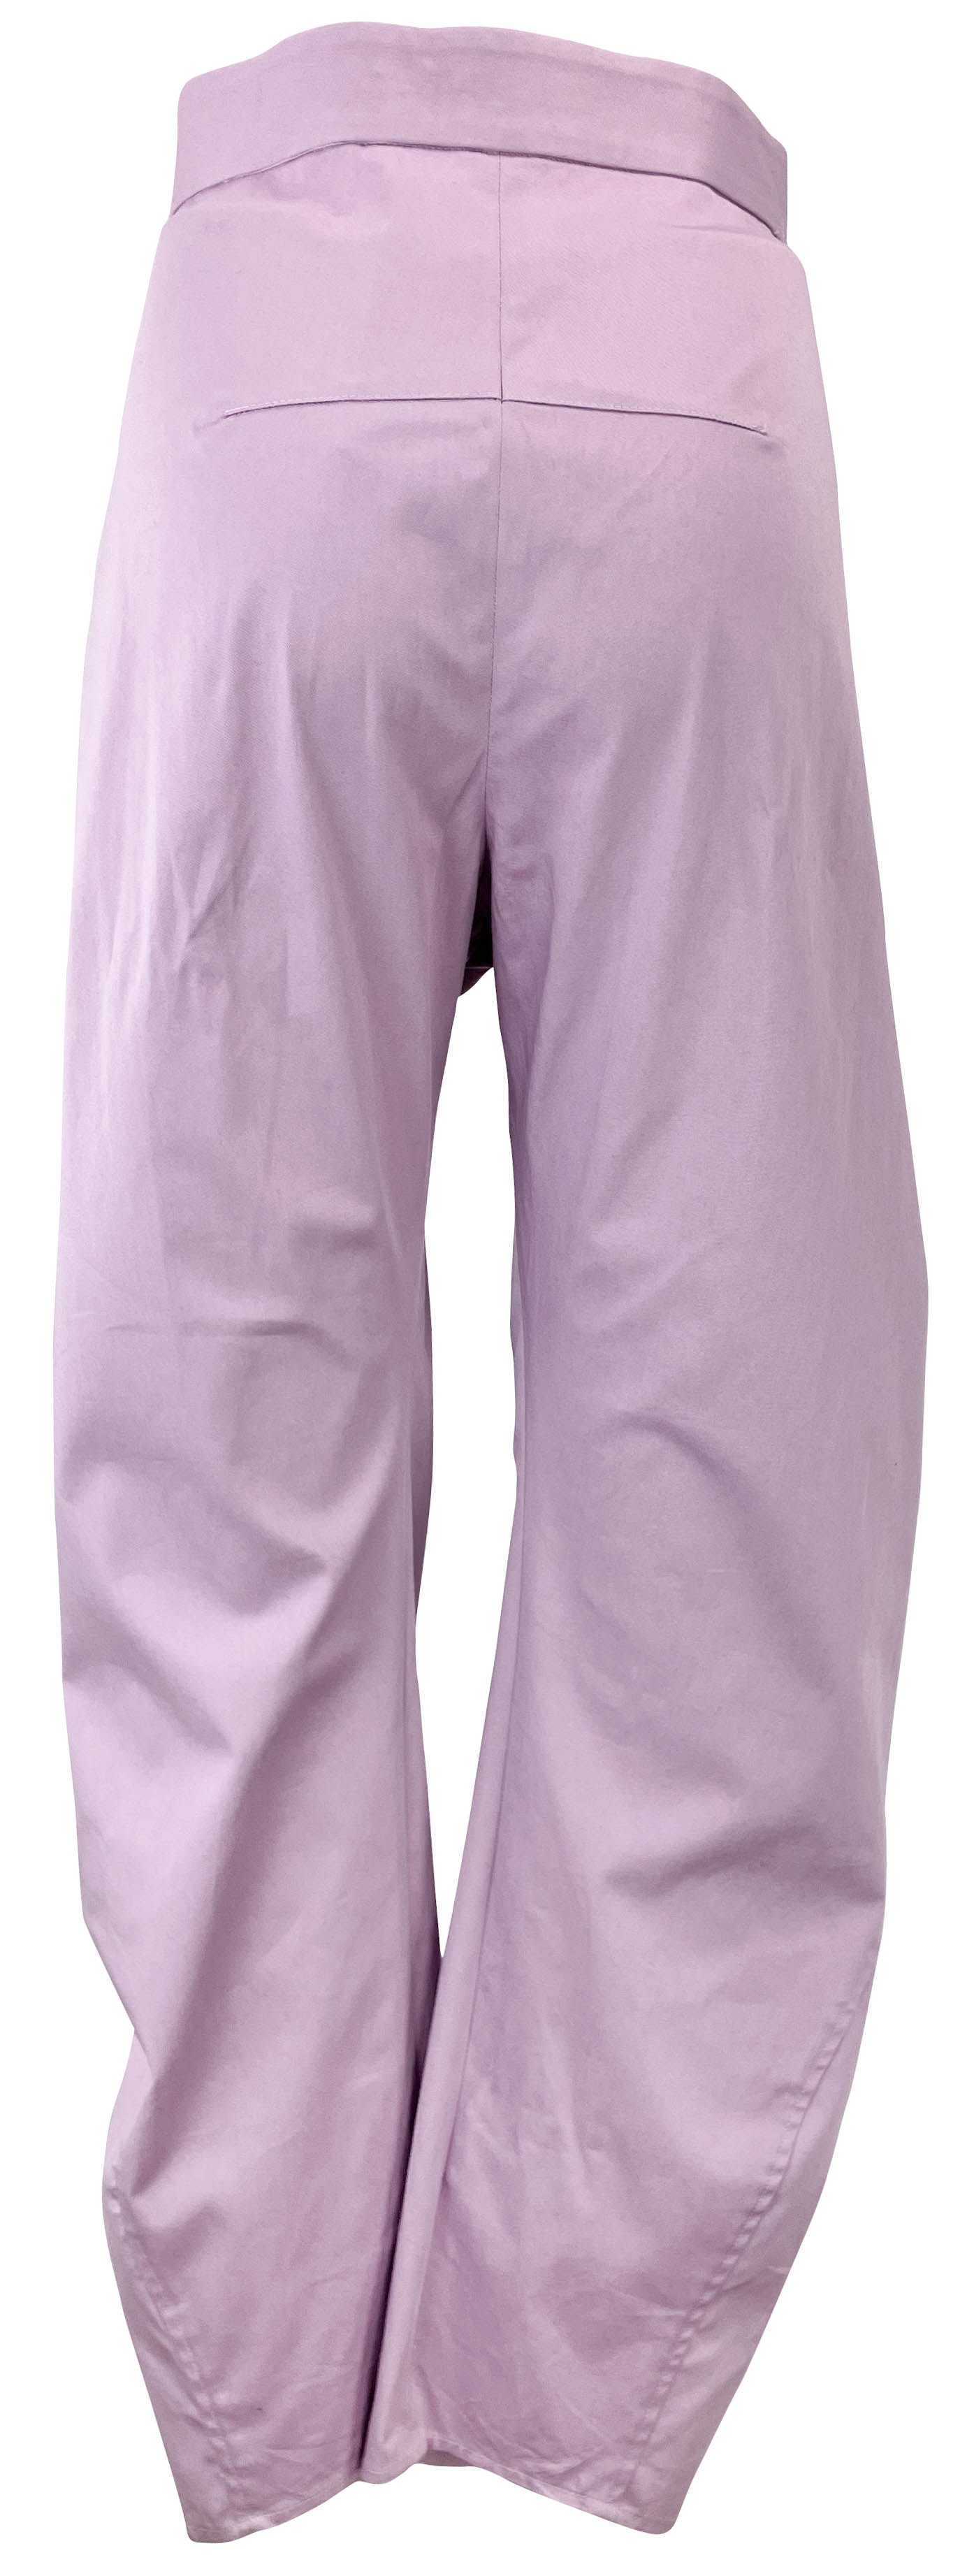 JW Anderson Off-Center Seam Trousers in Lilac - Discounts on JW Anderson at UAL